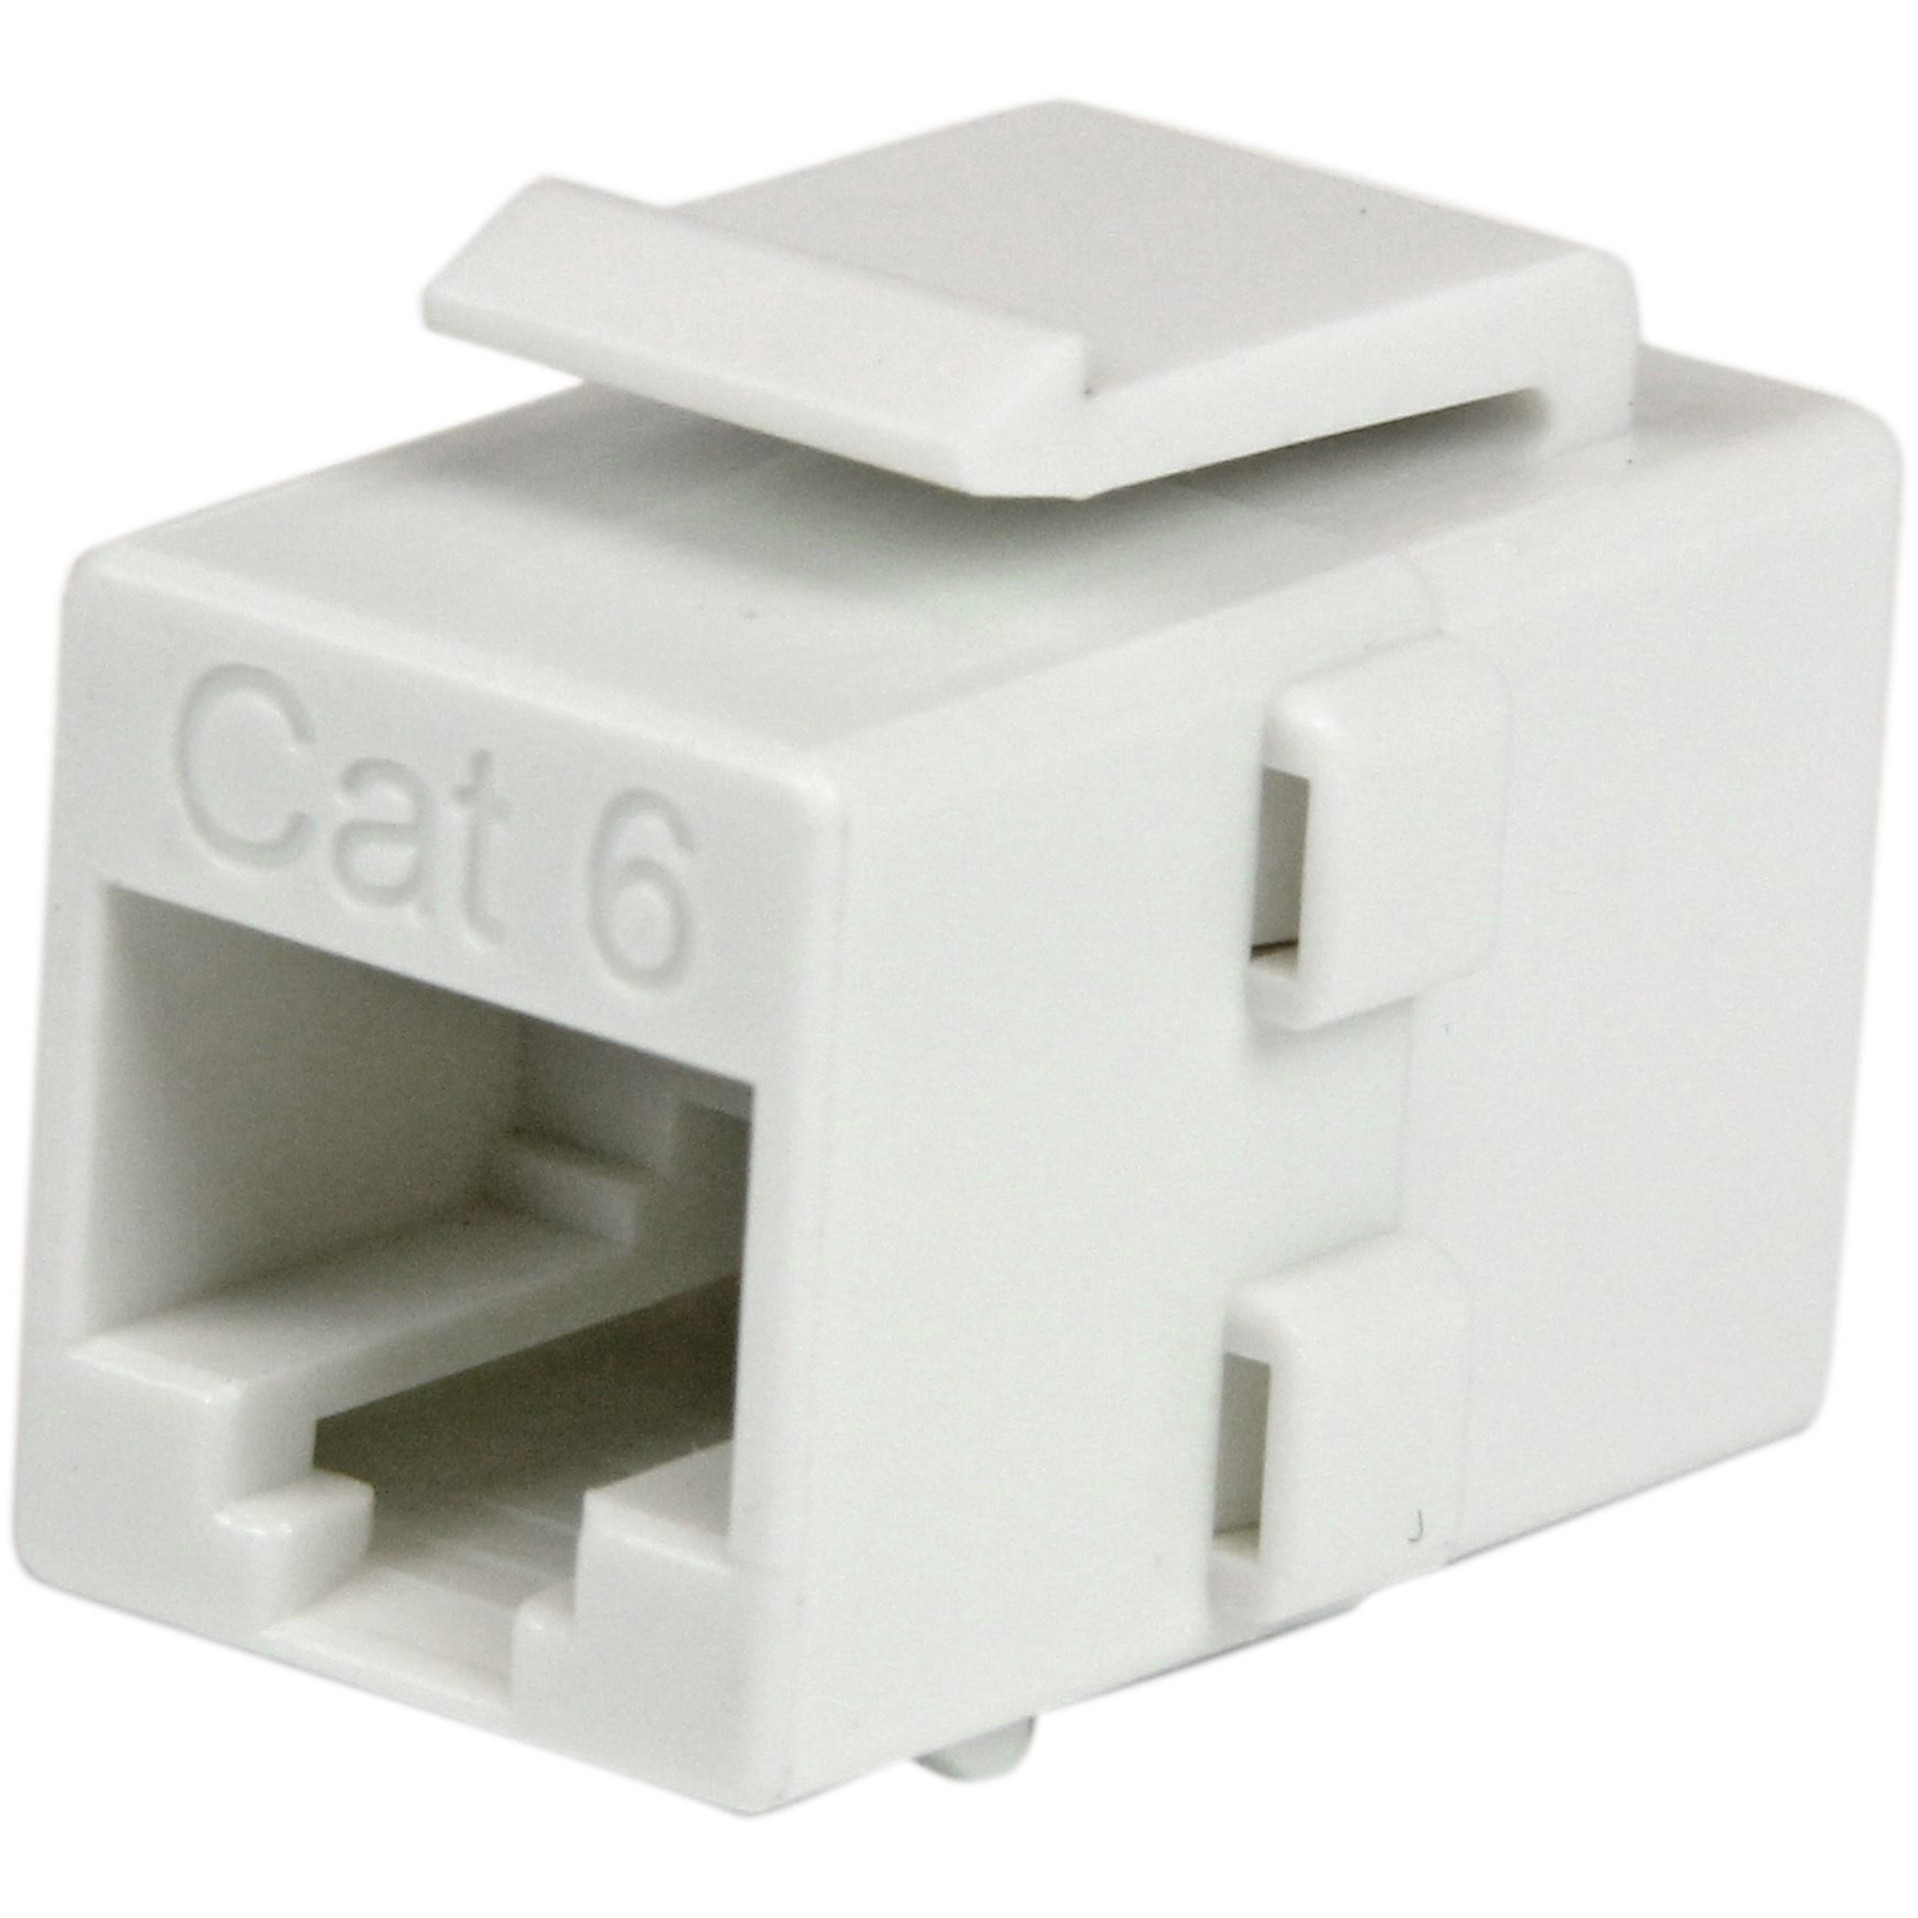 Startech .com White Cat 6 RJ45 Keystone Jack Network CouplerF/FJoin two Cat6 patch cables together to make a longer cableRJ45 Coupl… C6KEYCOUPLWH